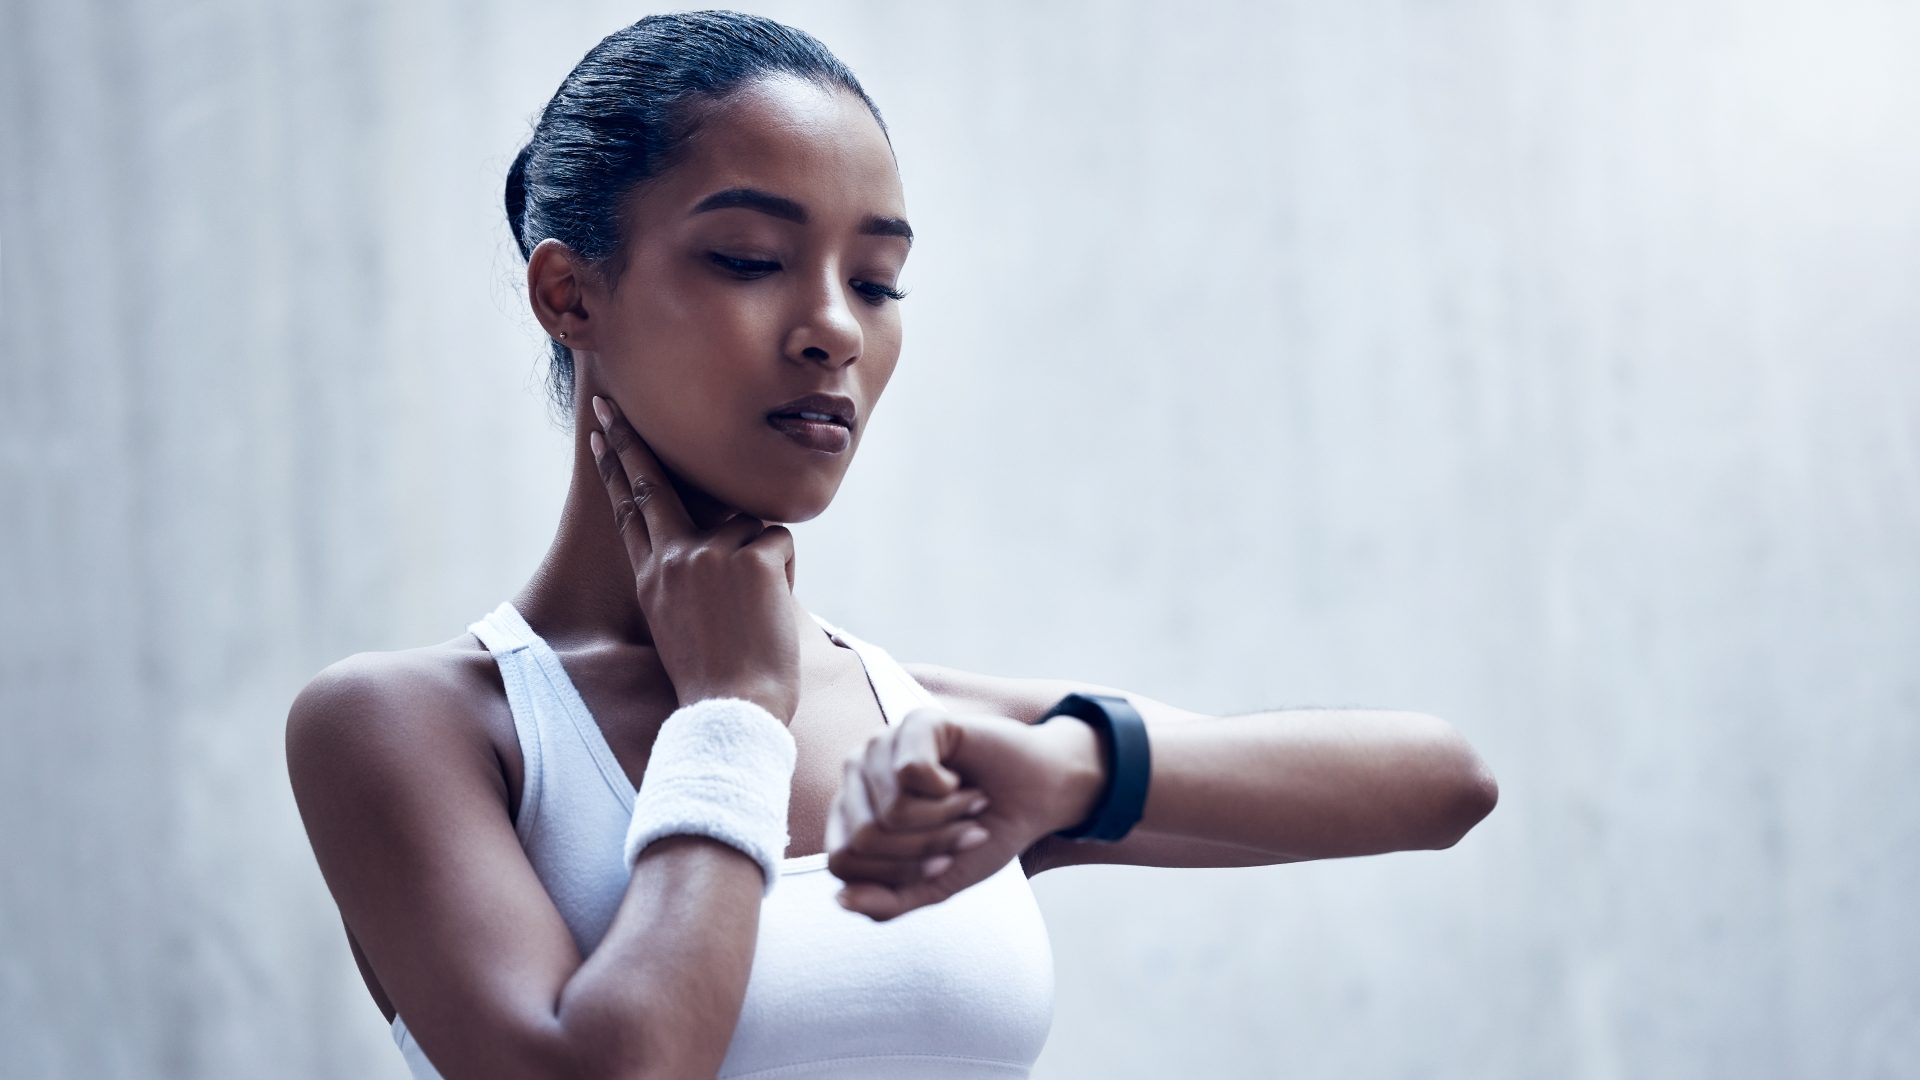 Woman with a wristband on her wrist and a hand on her neck checking her heart rate